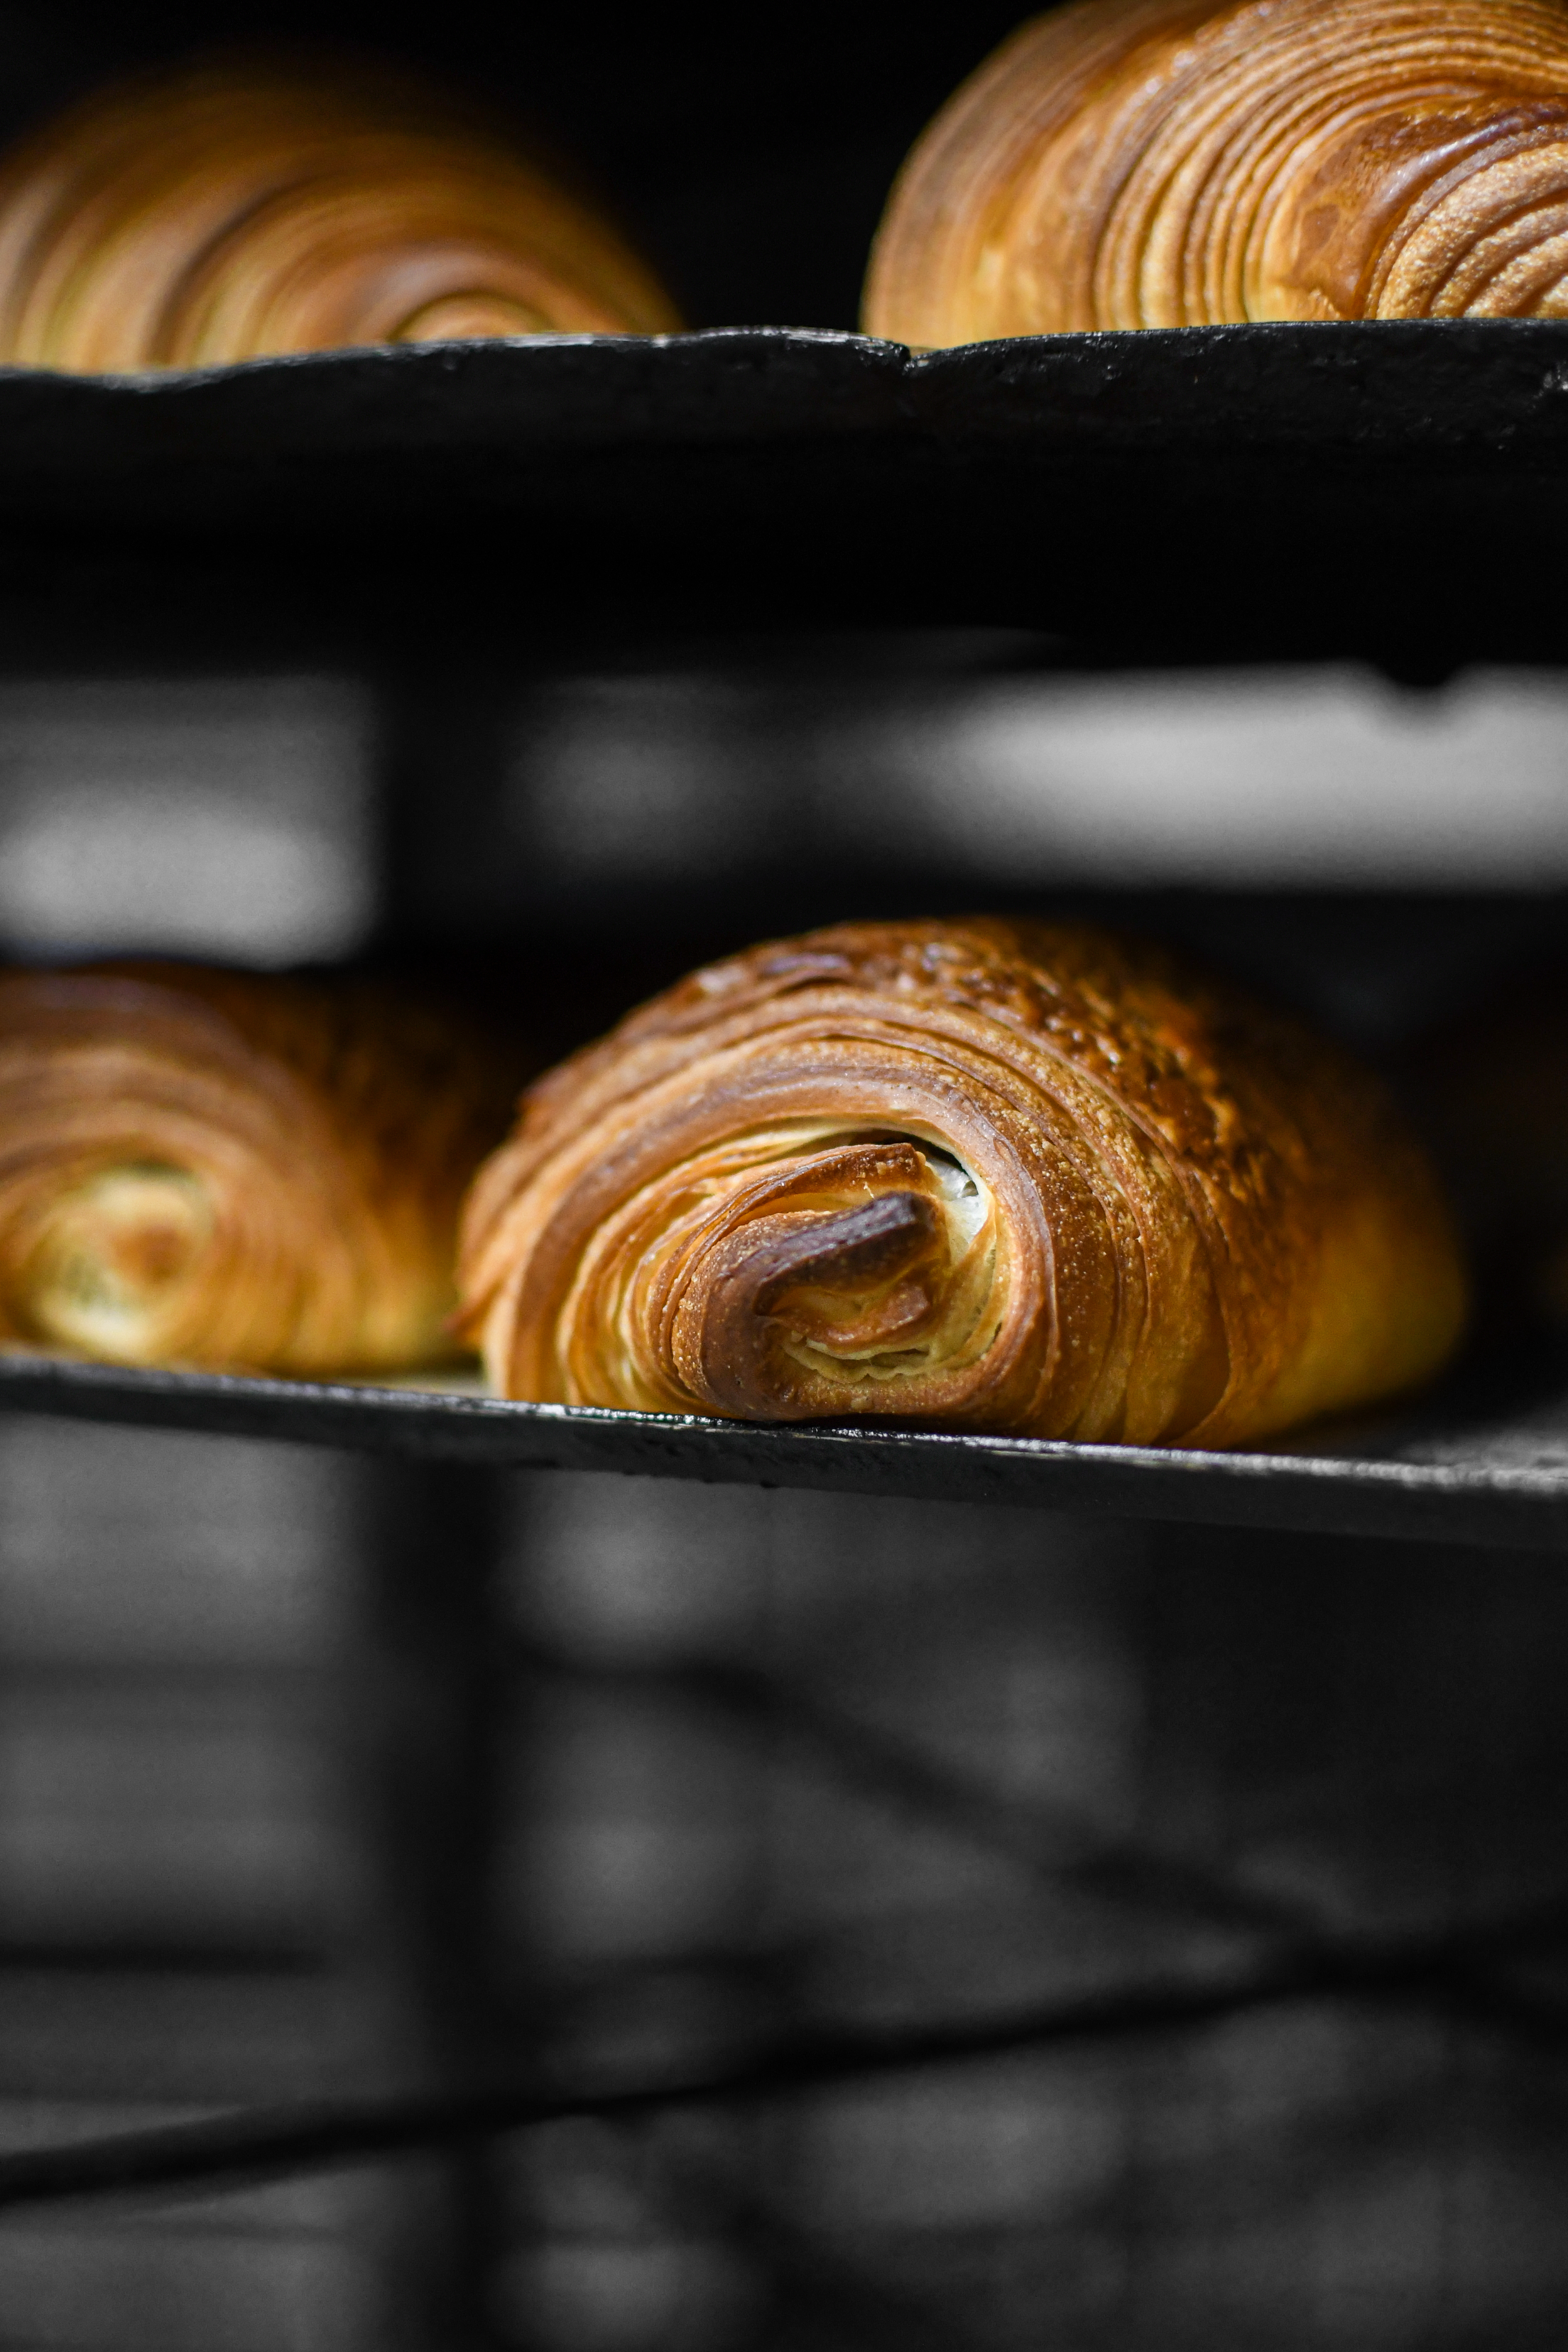 Croissants cooling on a rack at Boulangerie Veziano in Antibes, France.